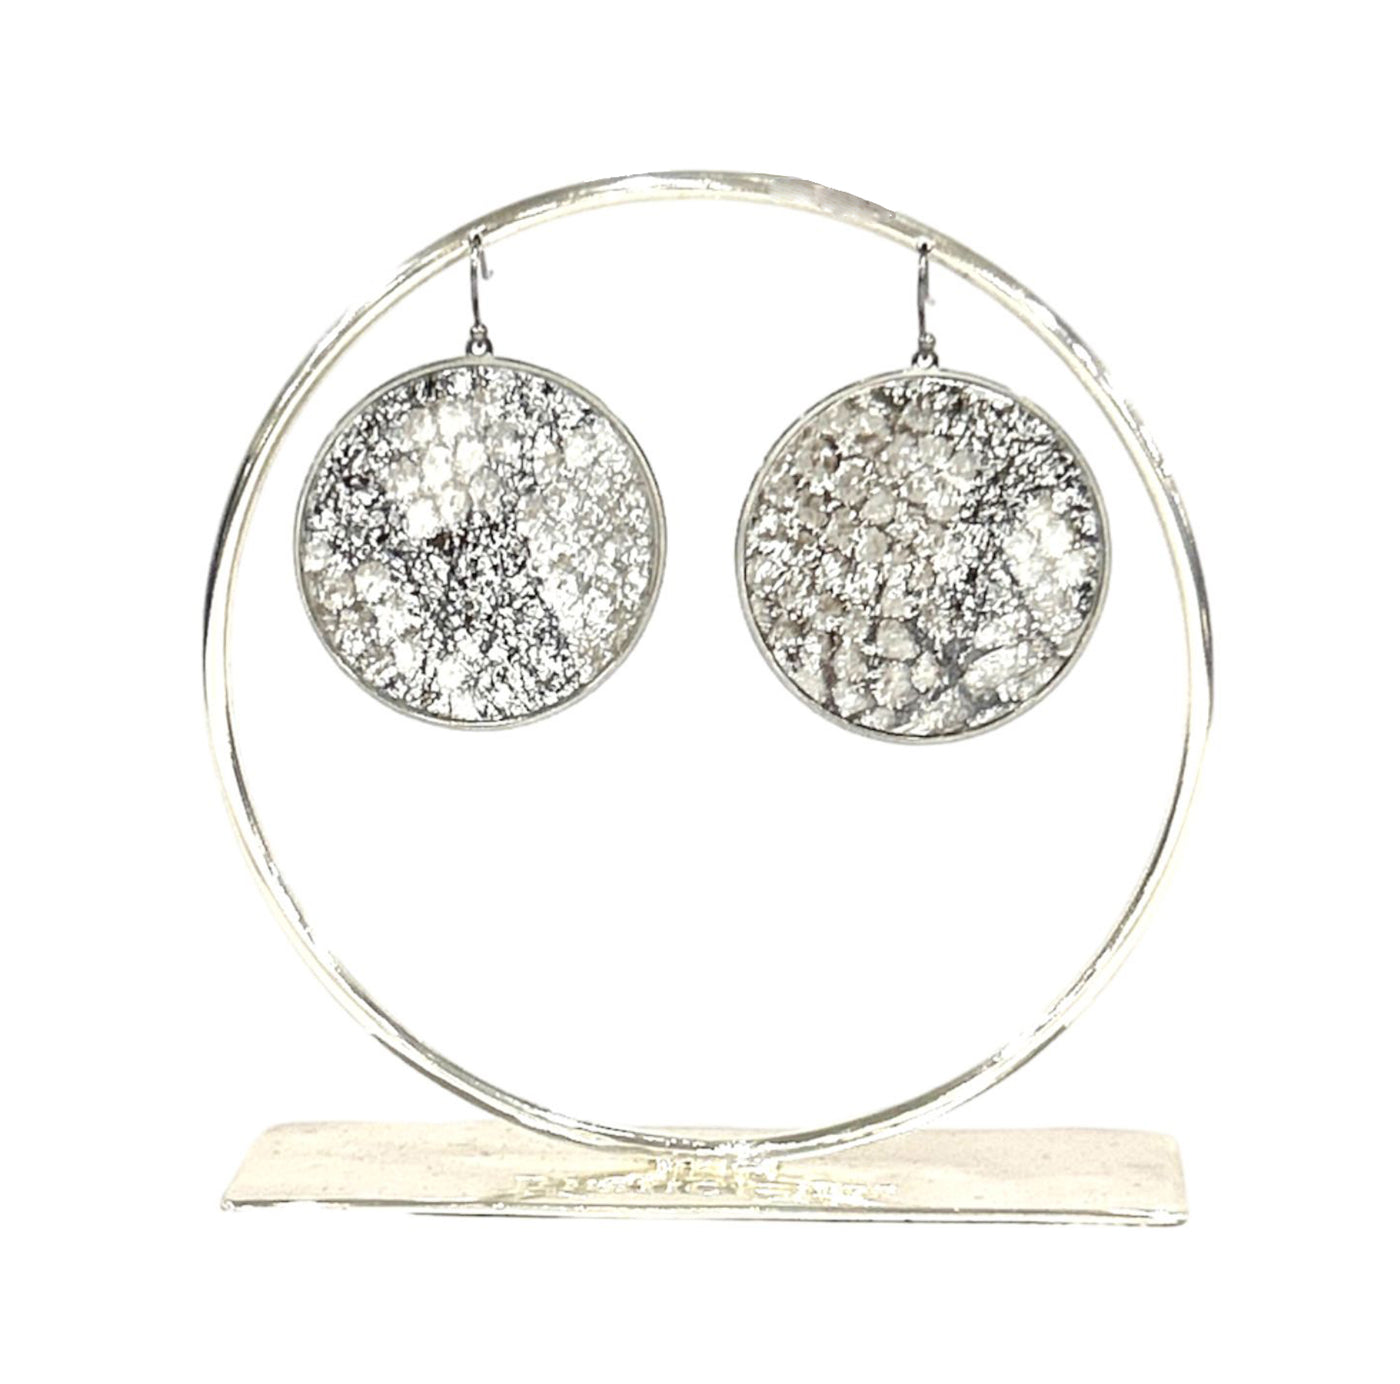 Python Round Earrings - All the Glitters on Silver